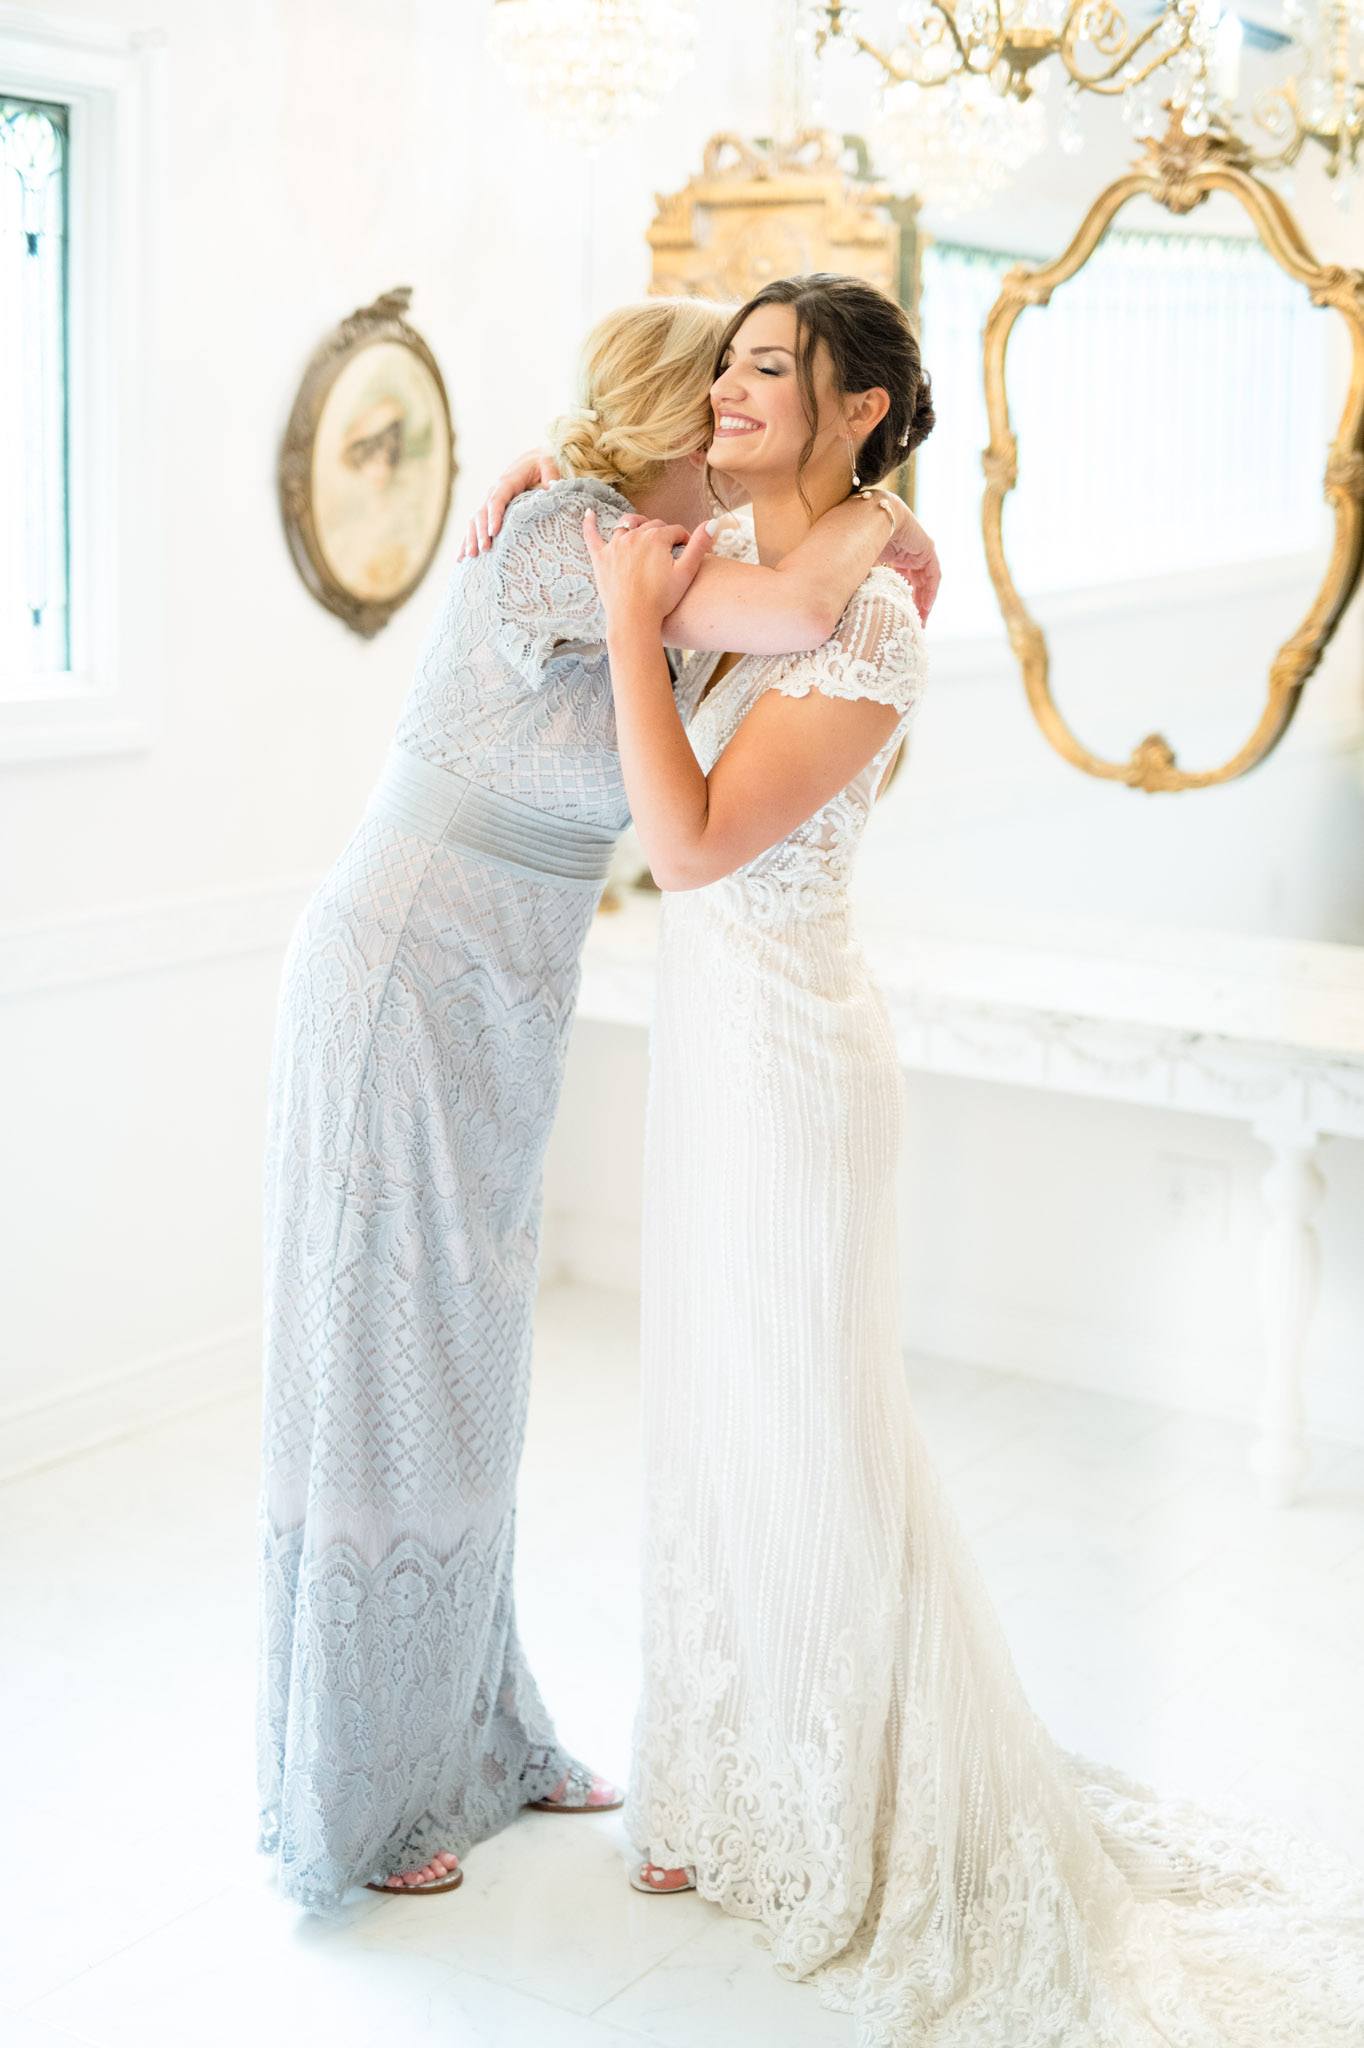 Bride hugs mother while getting ready.